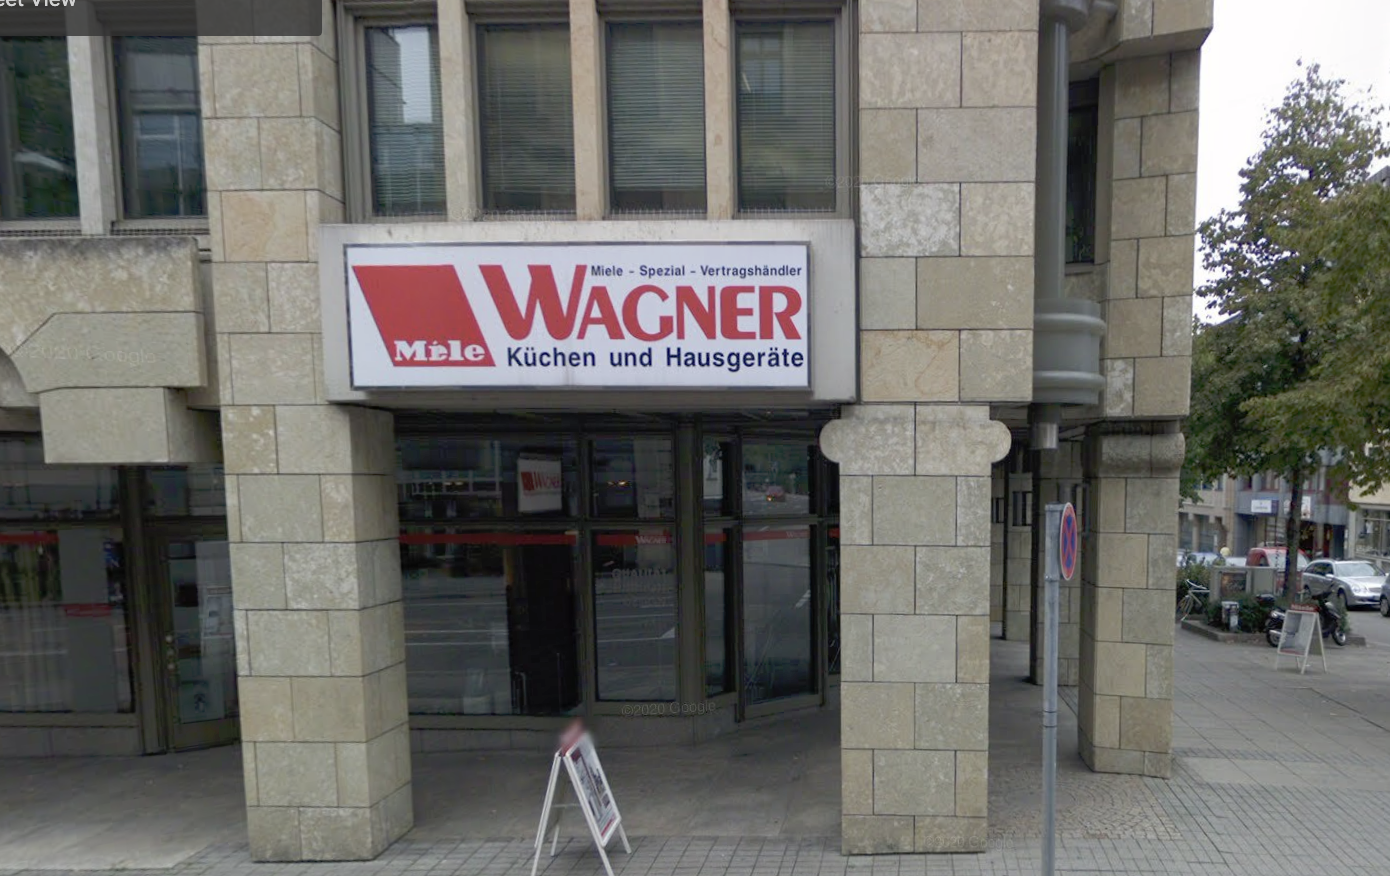 WAGNER kitchens and household appliances